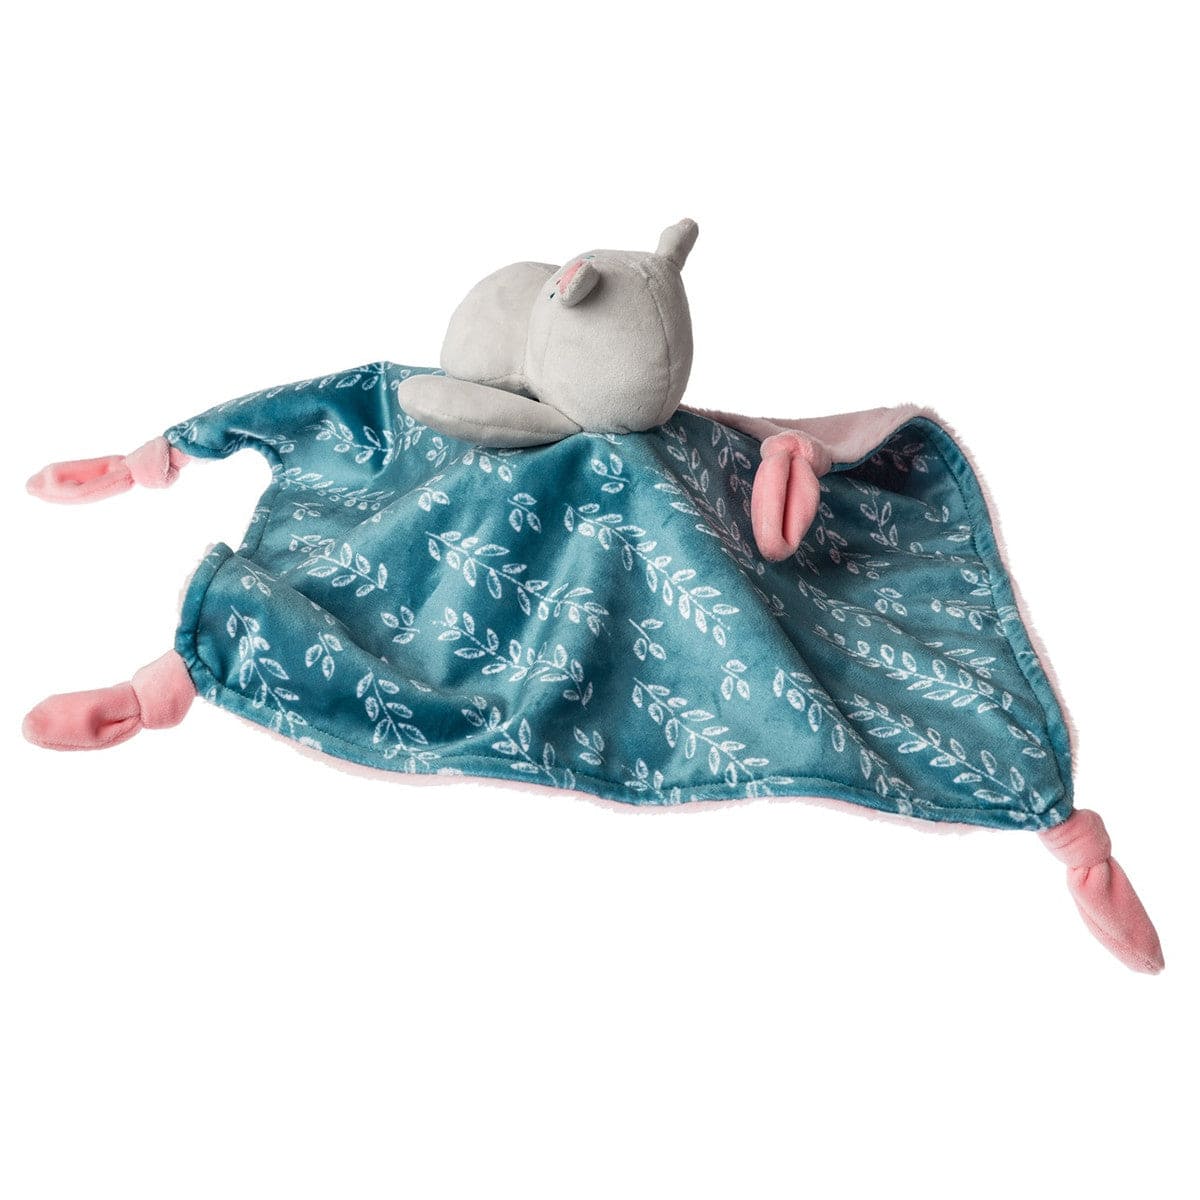 Jewel Hippo Character Blanket Mary Meyer Lil Tulips